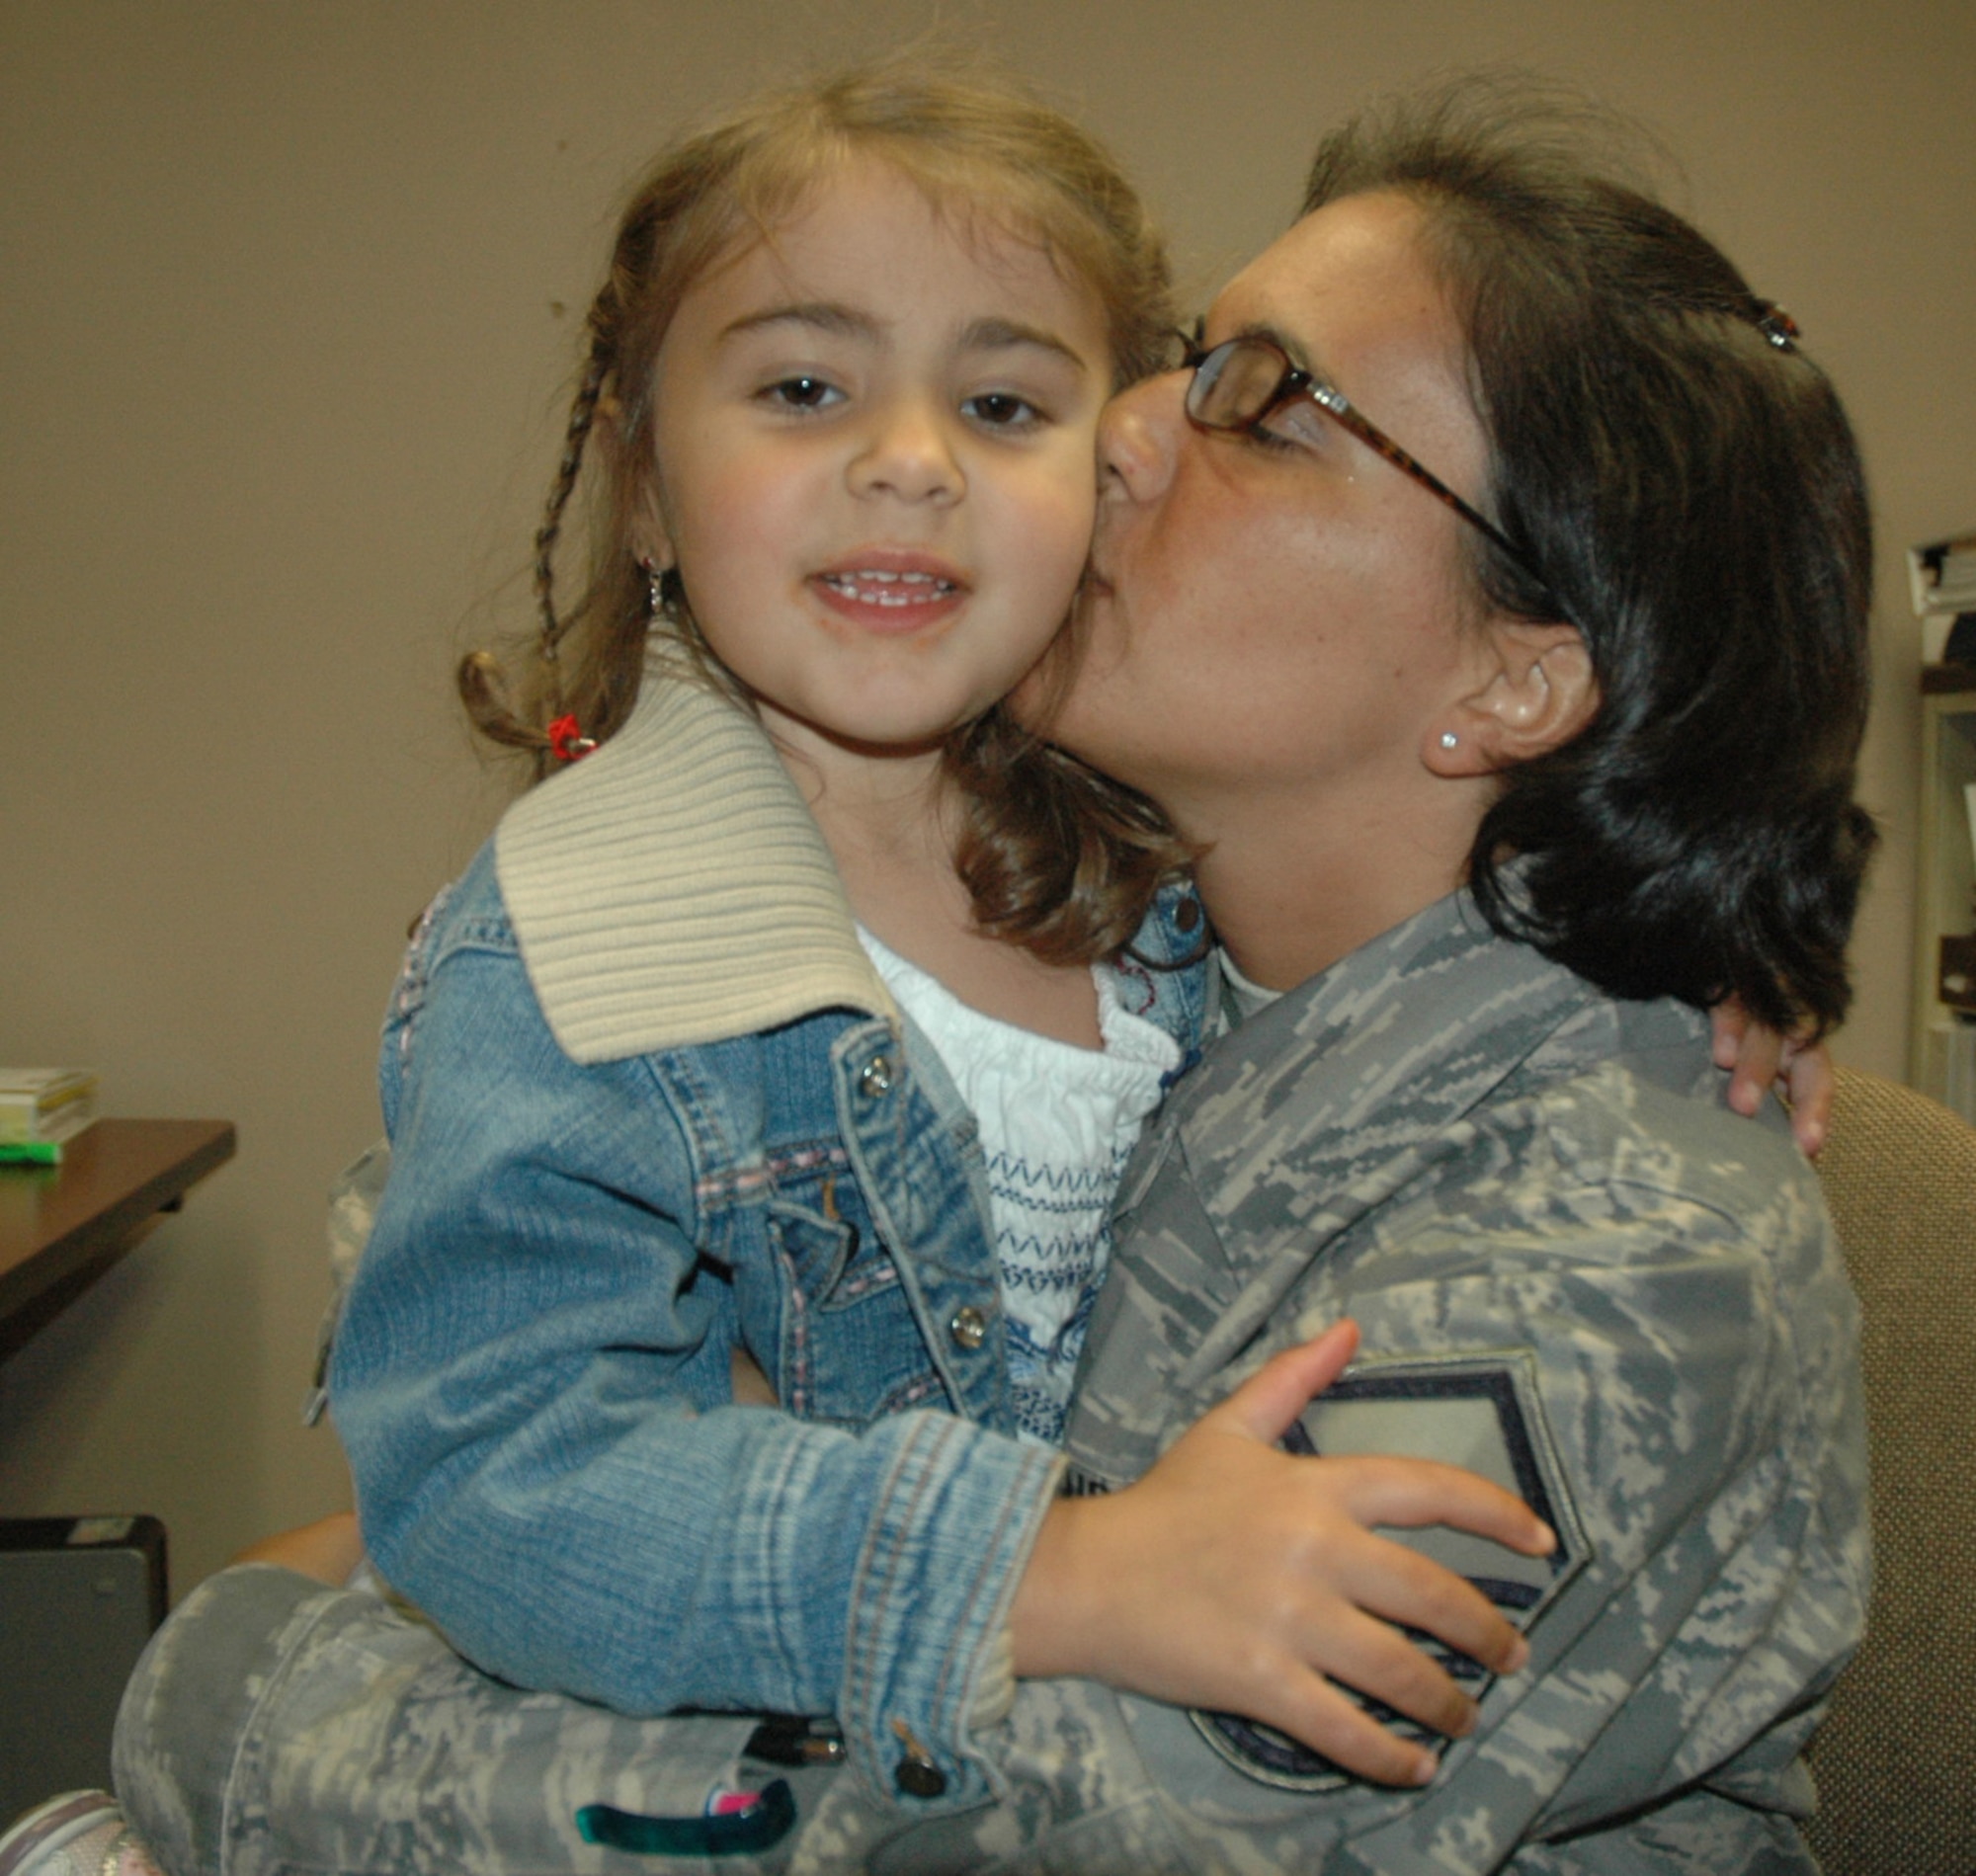 Master Sgt. Kara Stackpole, 439th Aeromedical Staging Squadron, gives a kiss to her daughter, Samantha, after the senior NCO's return from a deployment to Iraq in 2008.  (US Air Force photo/Tech. Sgt. Andrew Biscoe)